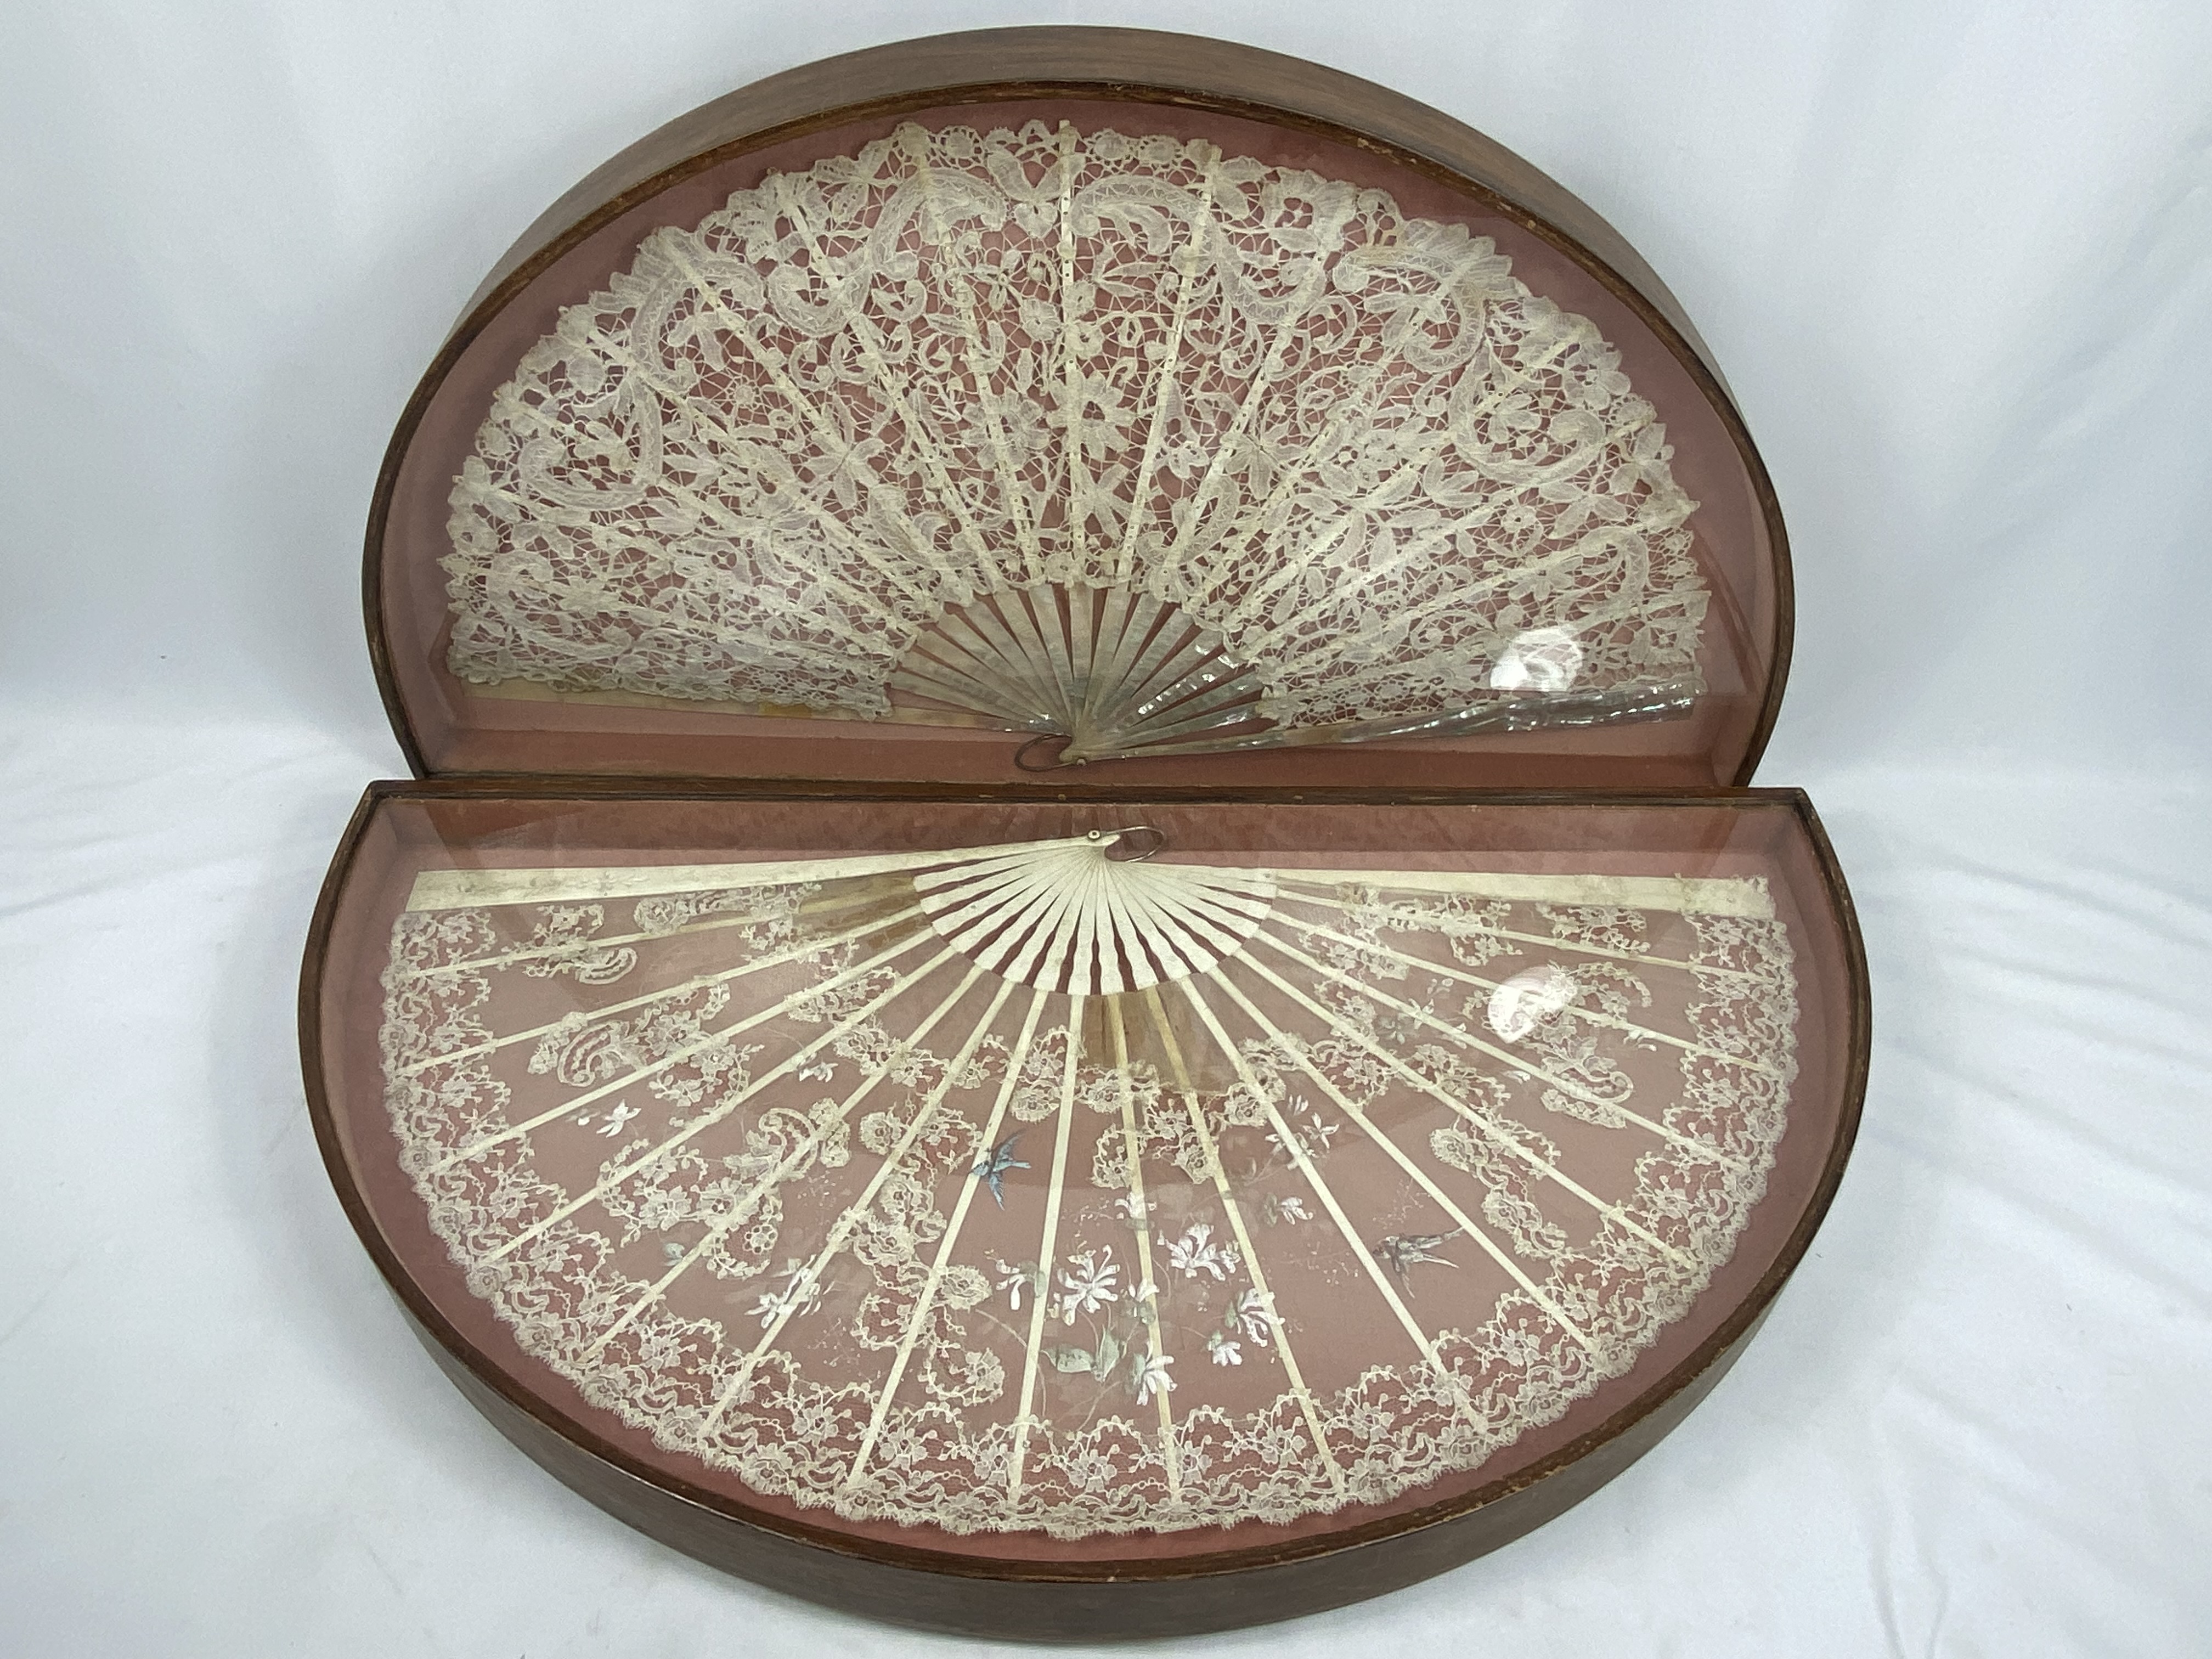 Two lace fans in display cases